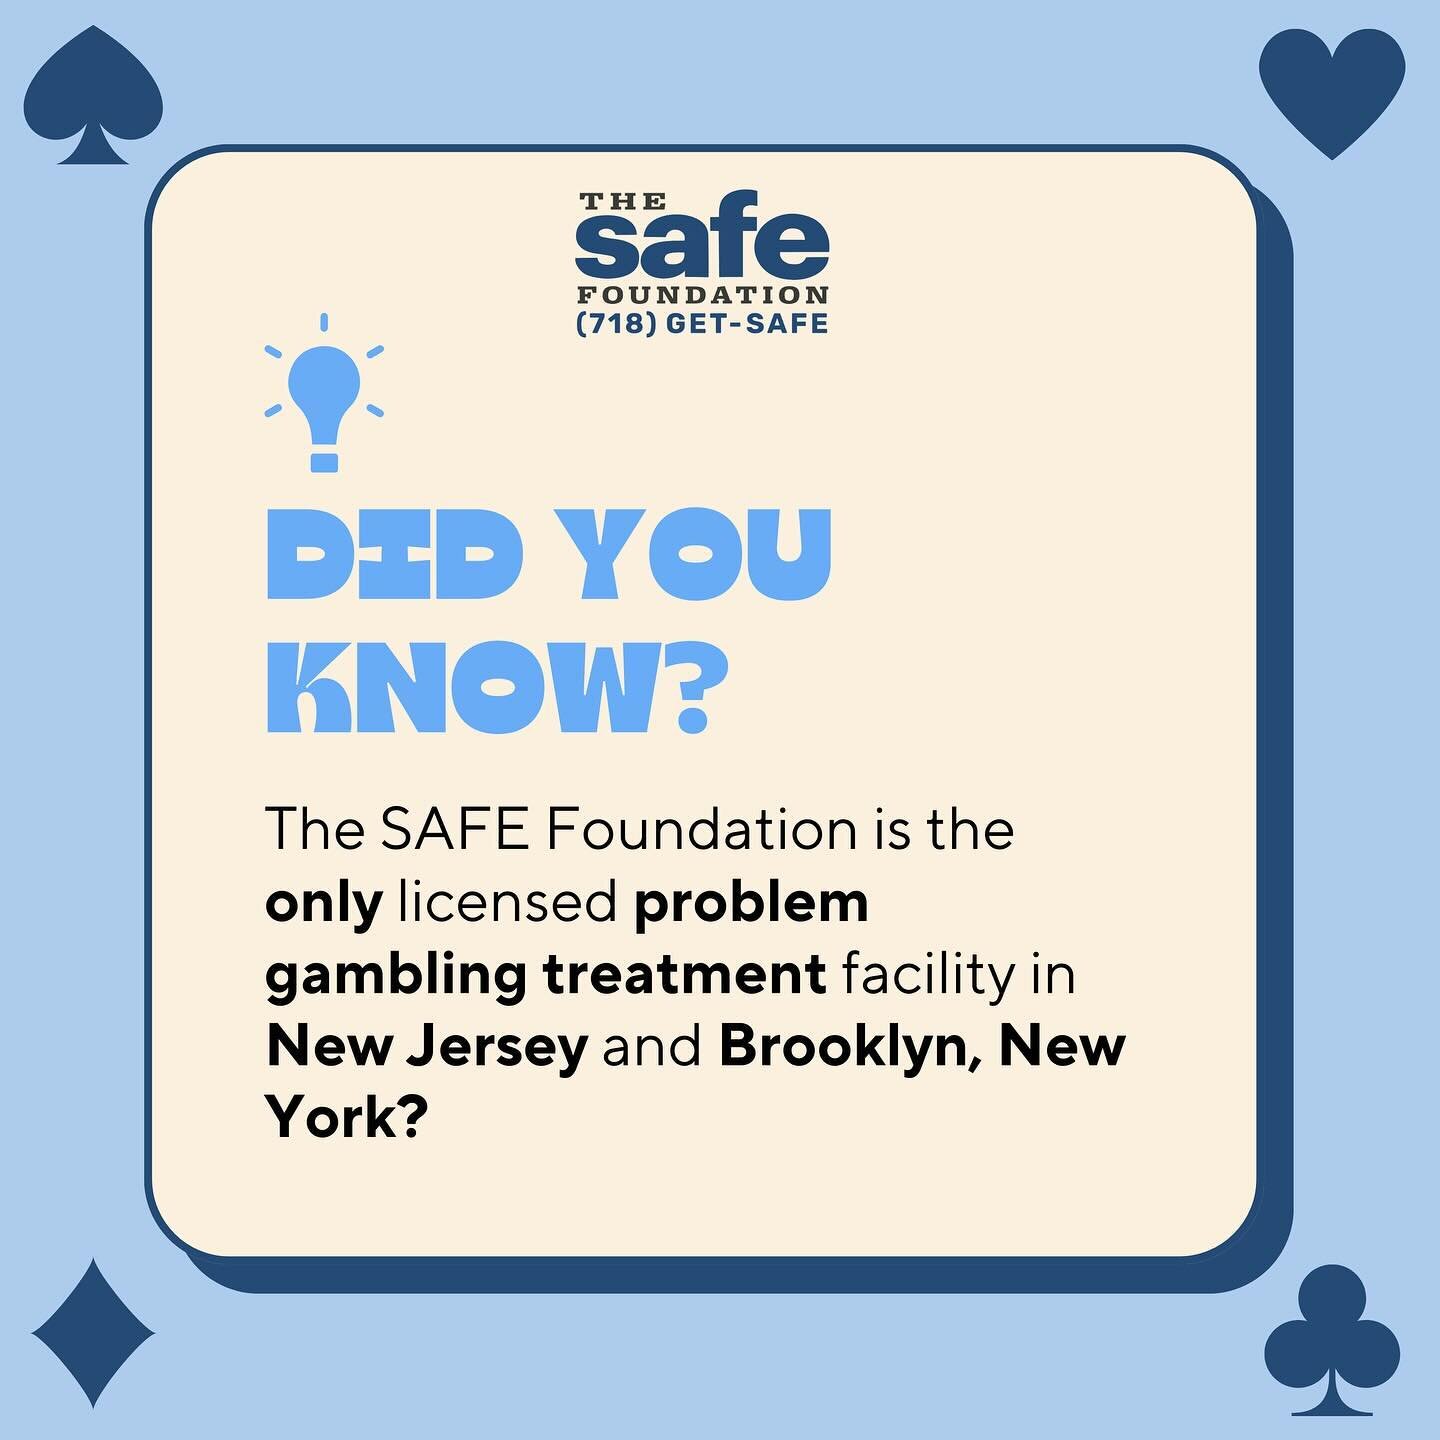 Problem gambling help is nearby! Call us today to talk about your treatment options. 718-GET-SAFE

#addiction #addictionrecovery #addictiontherapist #problemgambling #gamblingaddiction #substanceusedisorder #substanceabuse  #sober #sobriety #recovery